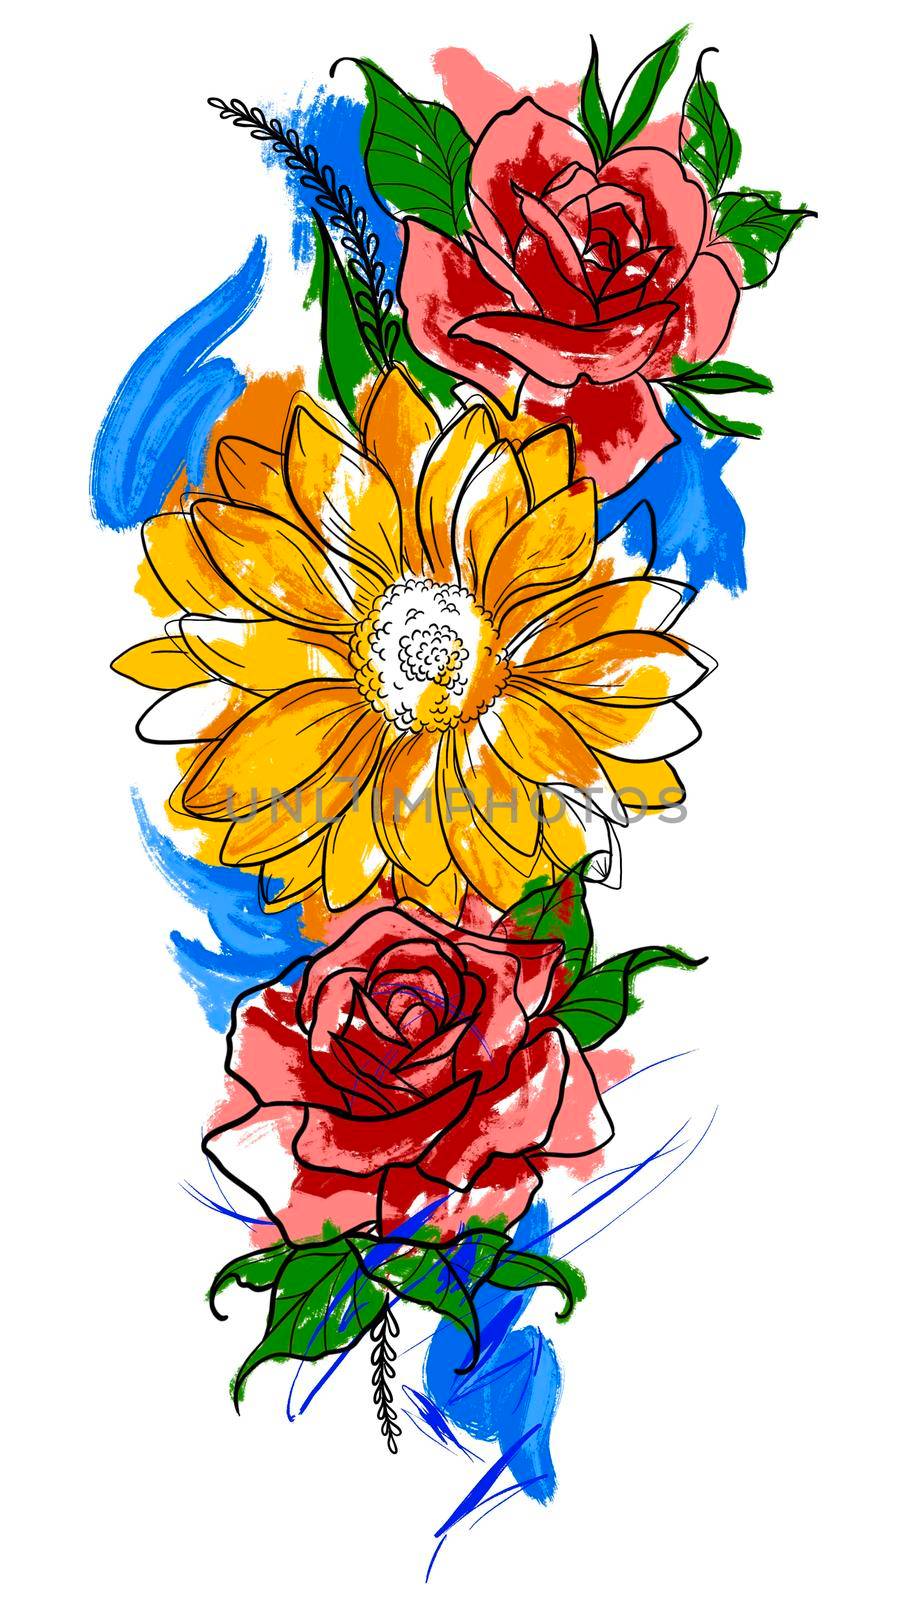 illustration of bright flowers with black outline in a watercolor style. Roses sunflowers lotuses